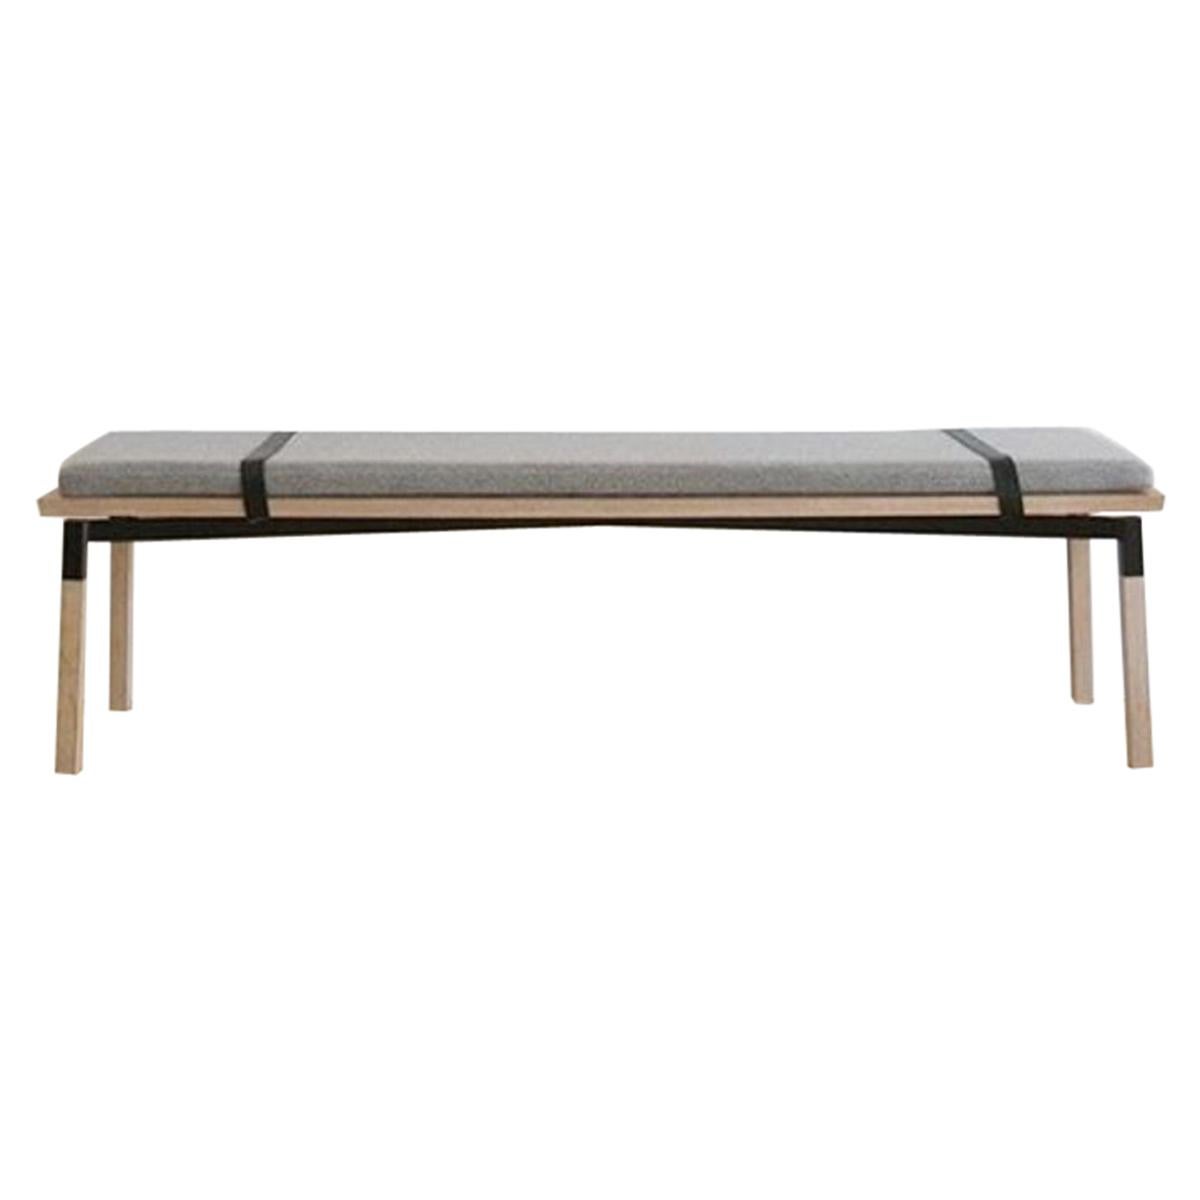 Metal Plated Walnut Large Parkdale Bench with Cushion by Hollis & Morris For Sale